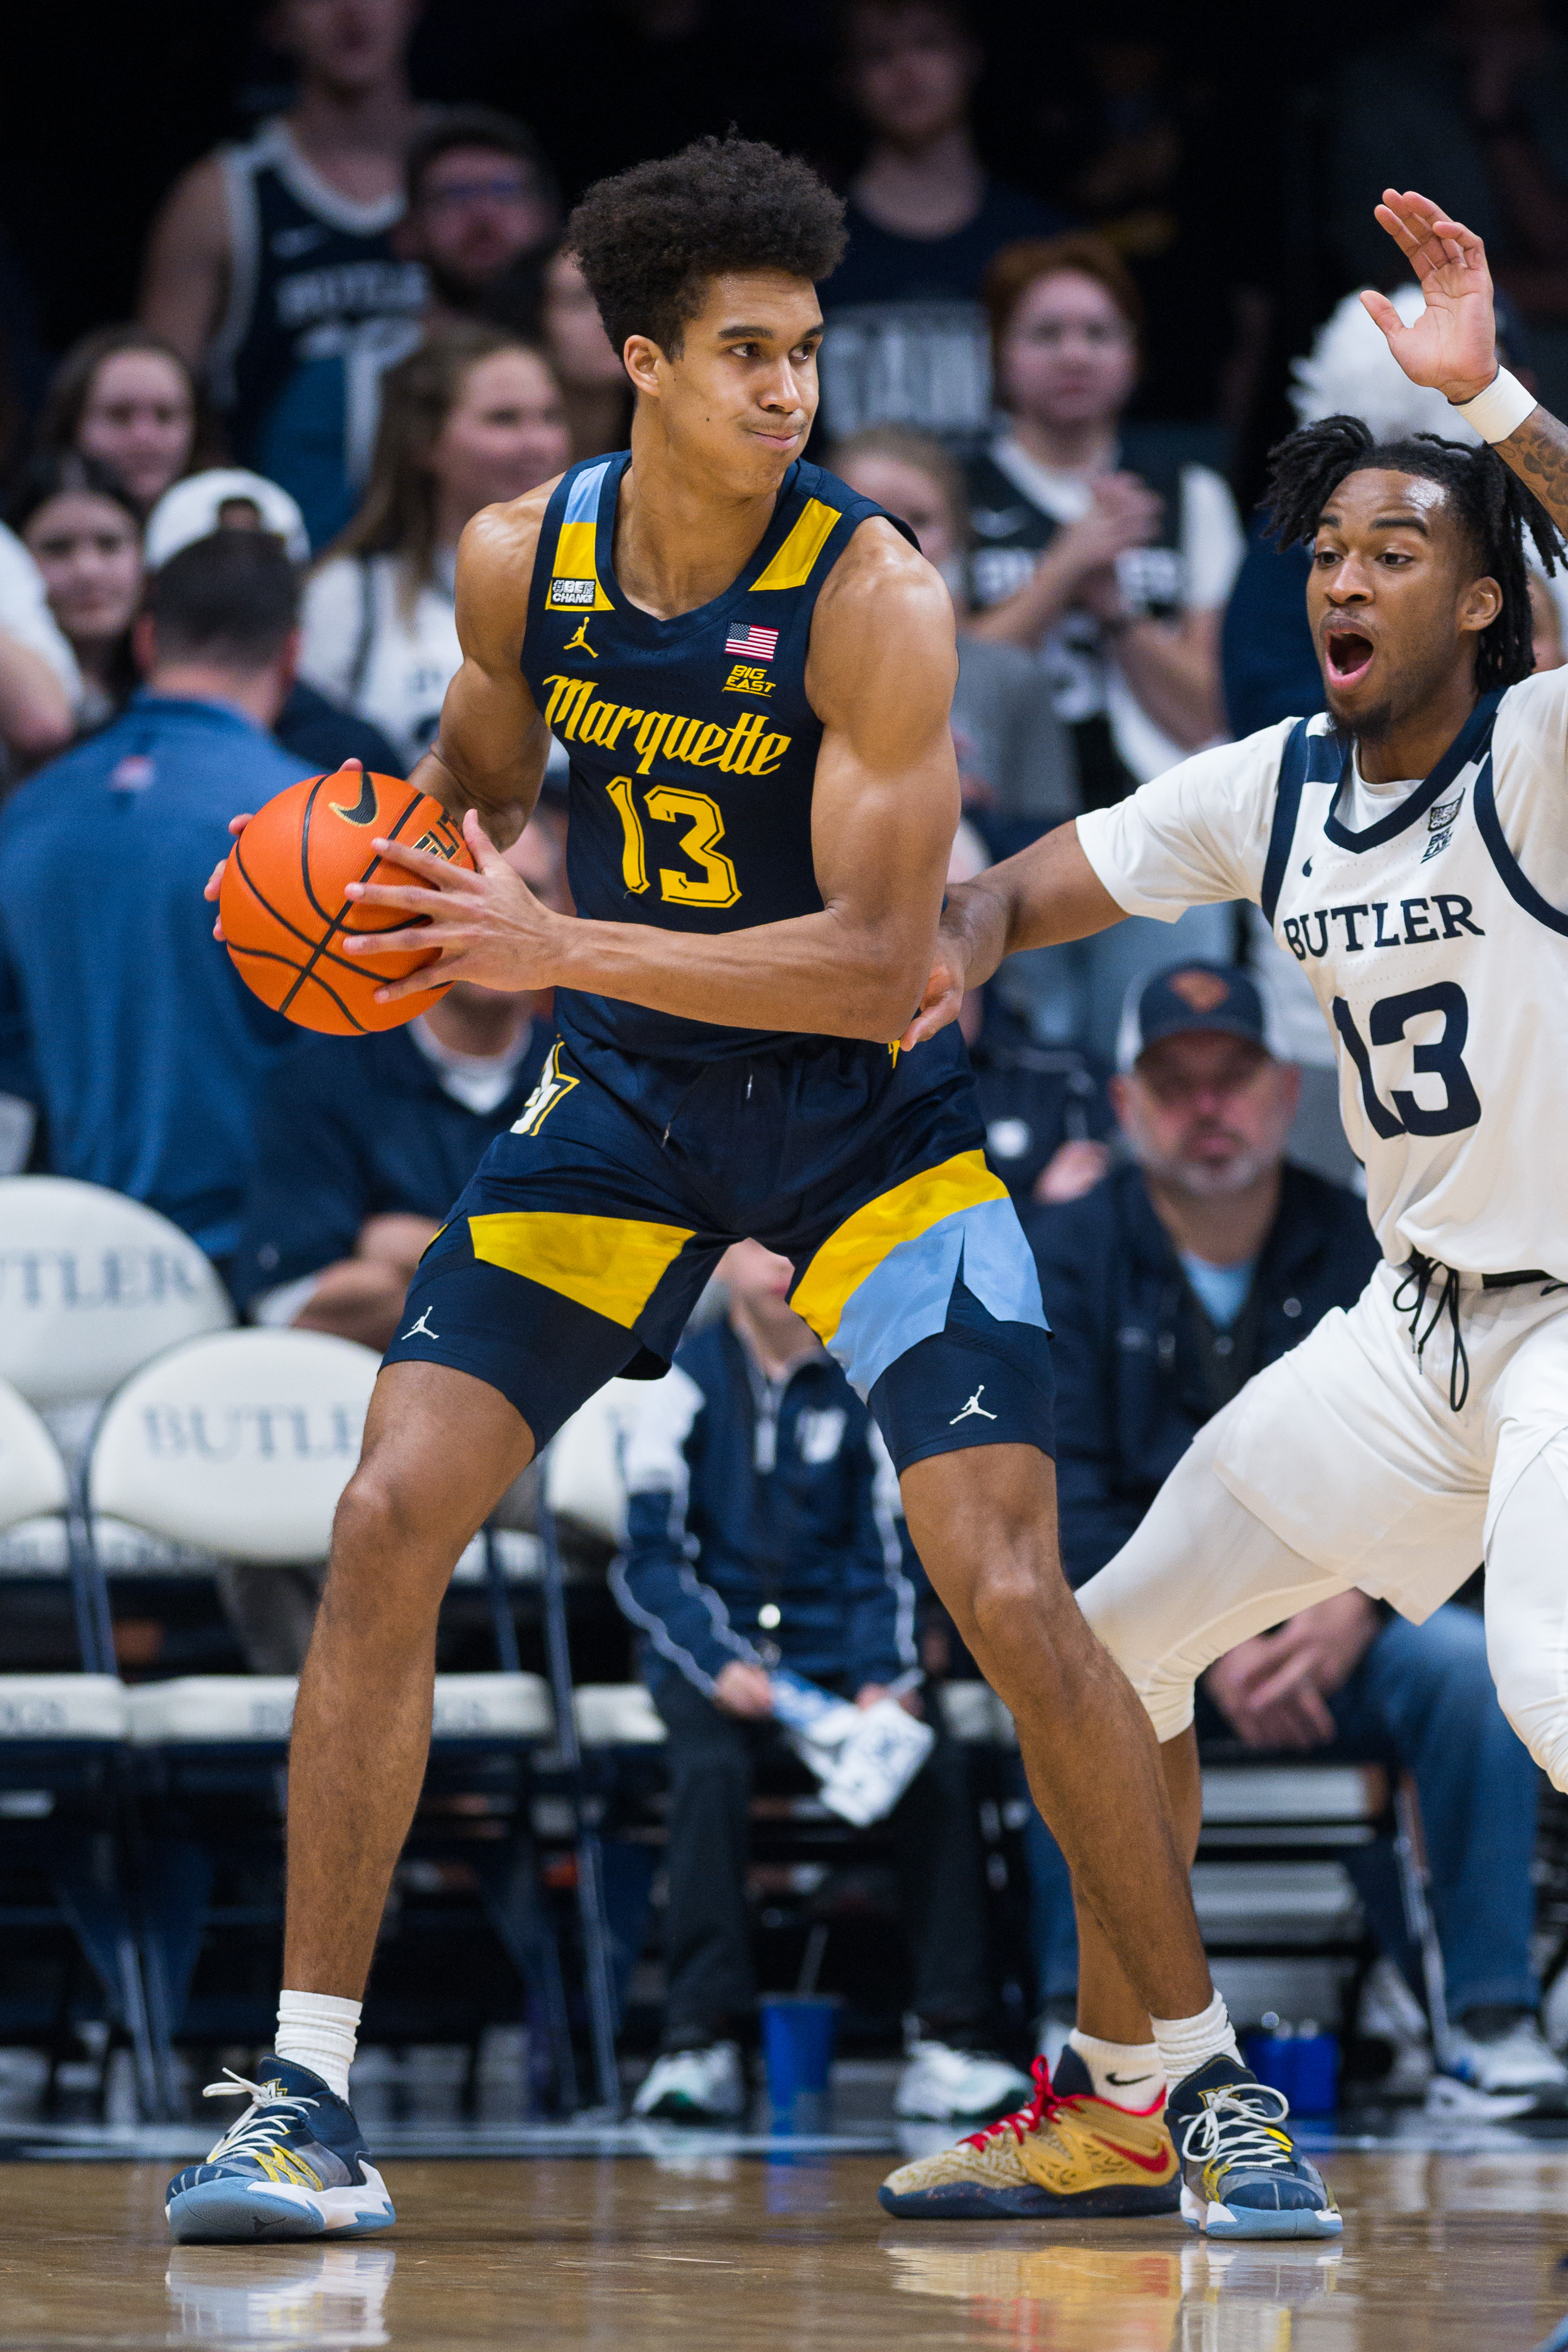 COLLEGE BASKETBALL: FEB 28 Marquette at Butler